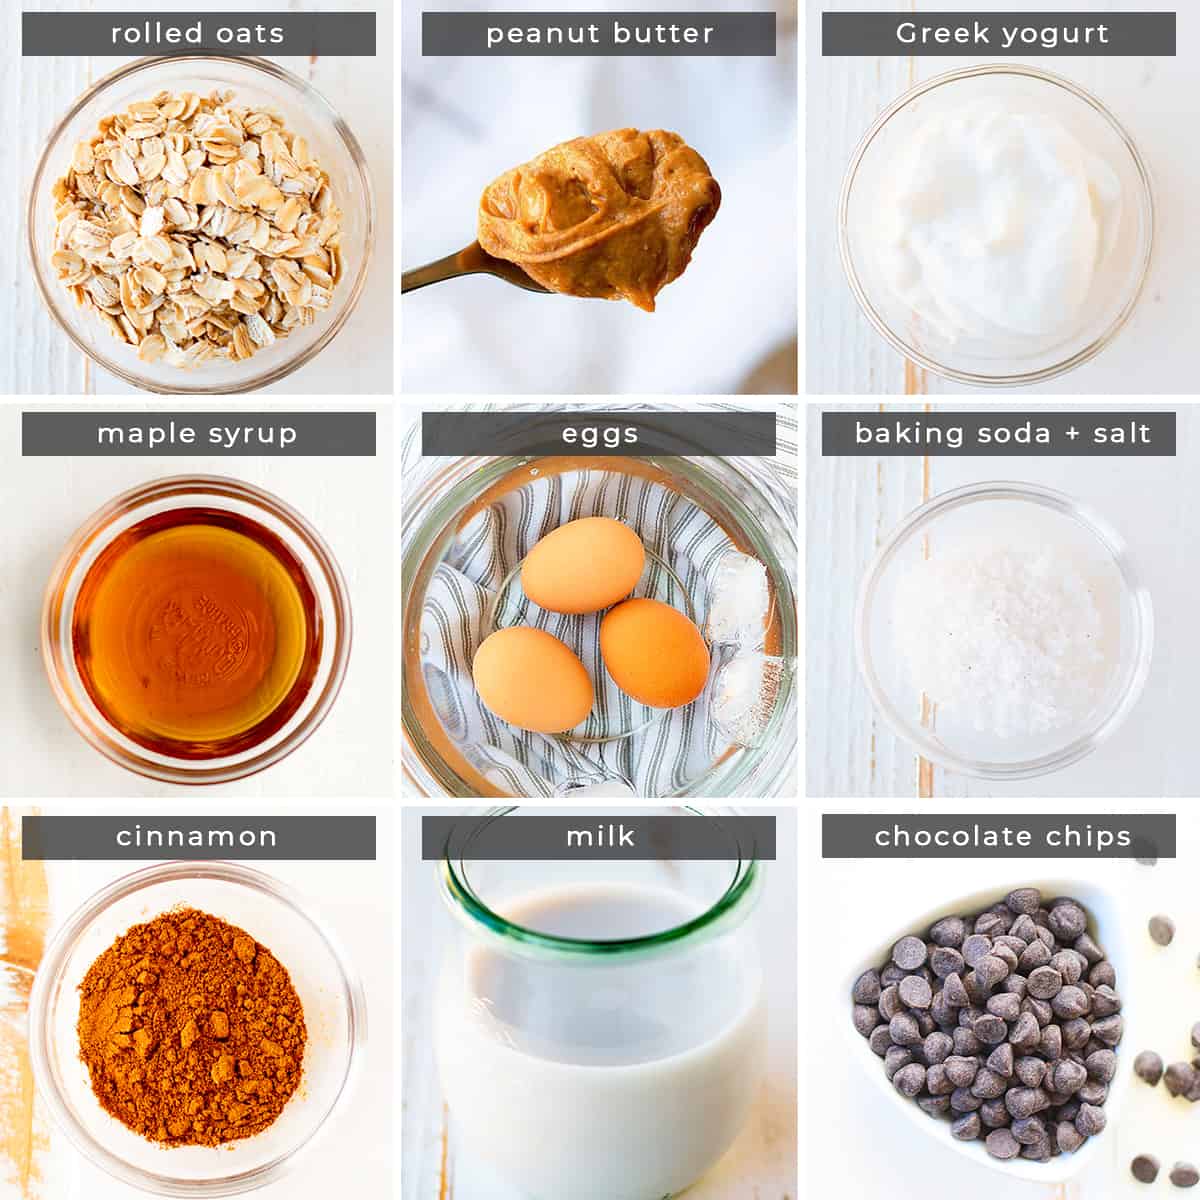 Image containing recipe ingredients rolled oats, peanut butter, Greek yogurt, maple syrup, eggs, baking soda and salt, cinnamon, milk, and chocolate chips.